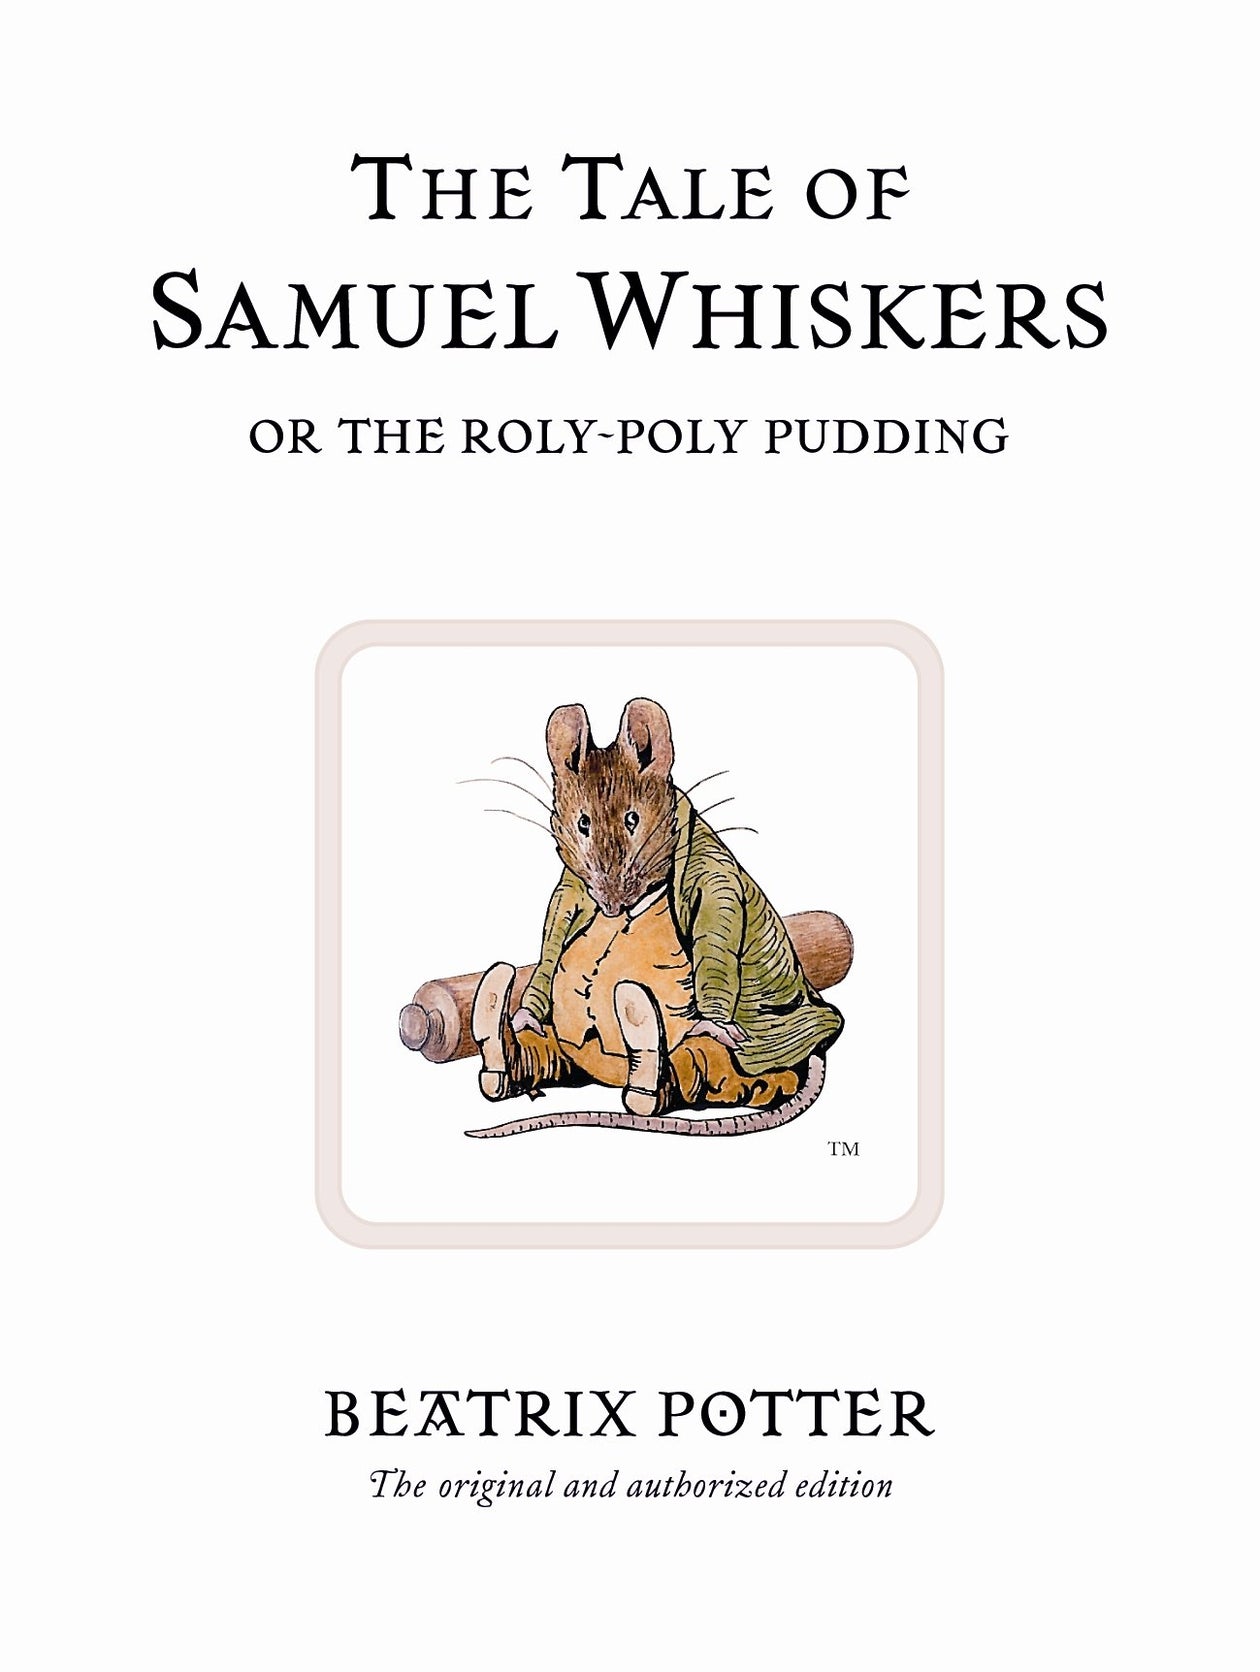 The Tale of Beatrix Potter: 9780451533302